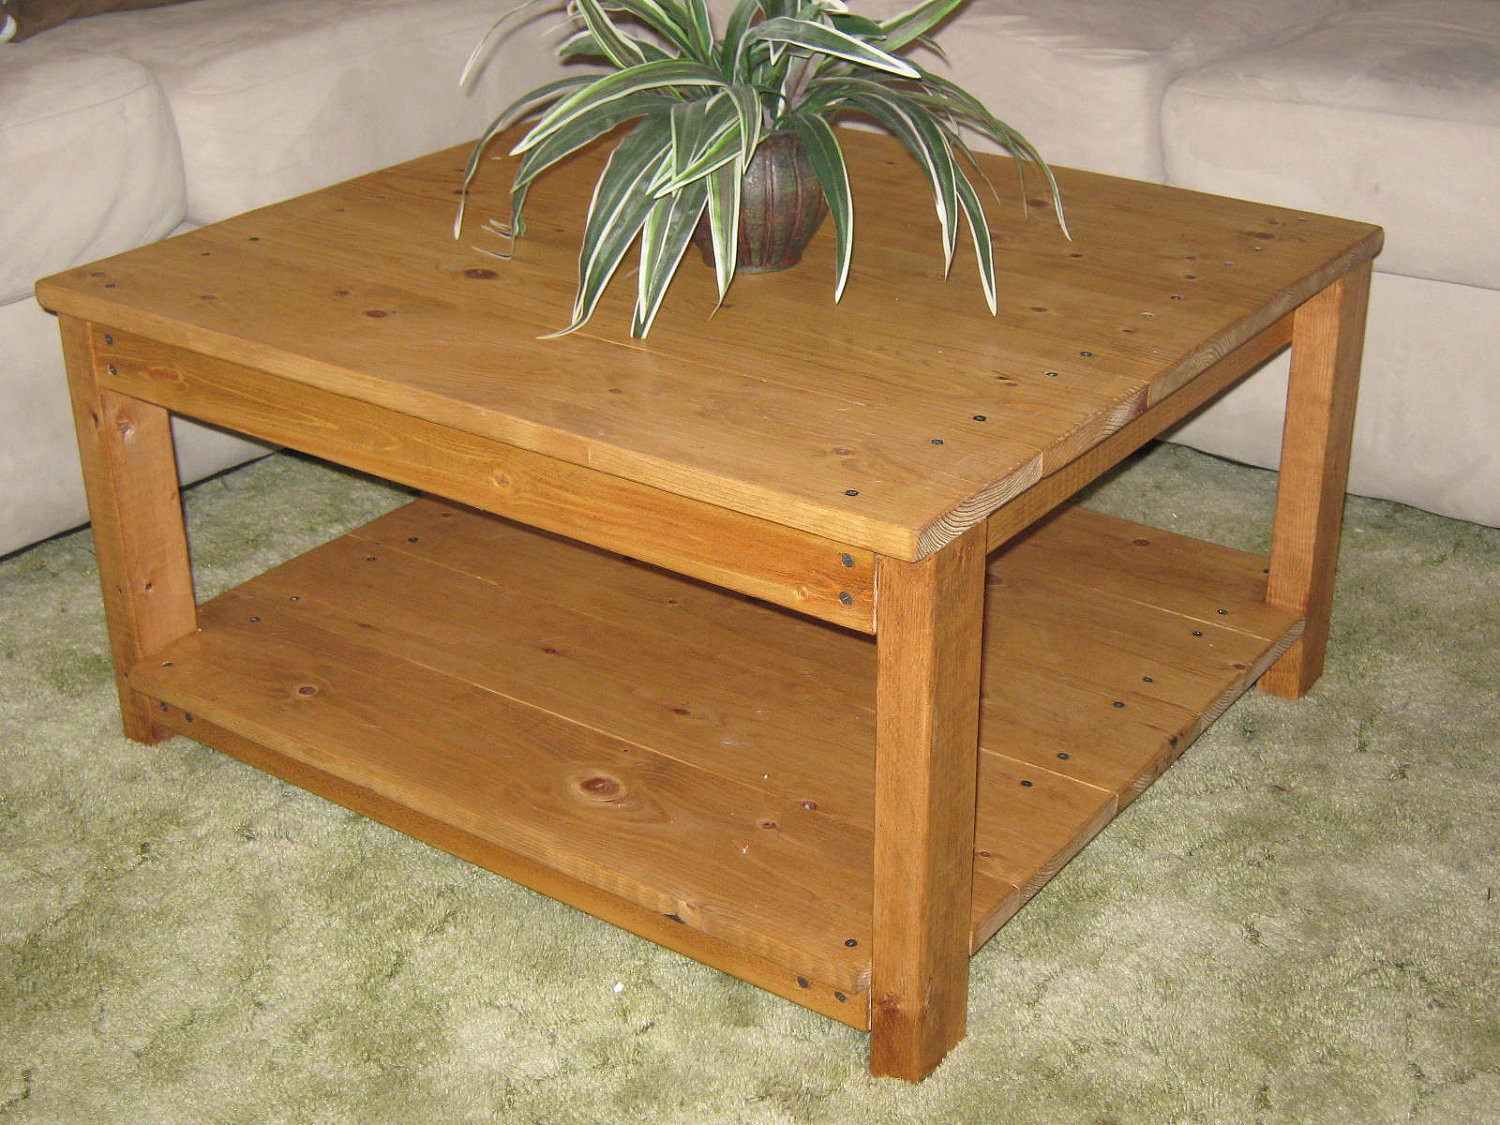 DIY Wooden Coffee Table
 DIY PLANS to make Square Wooden Coffee Table by wingstoshop